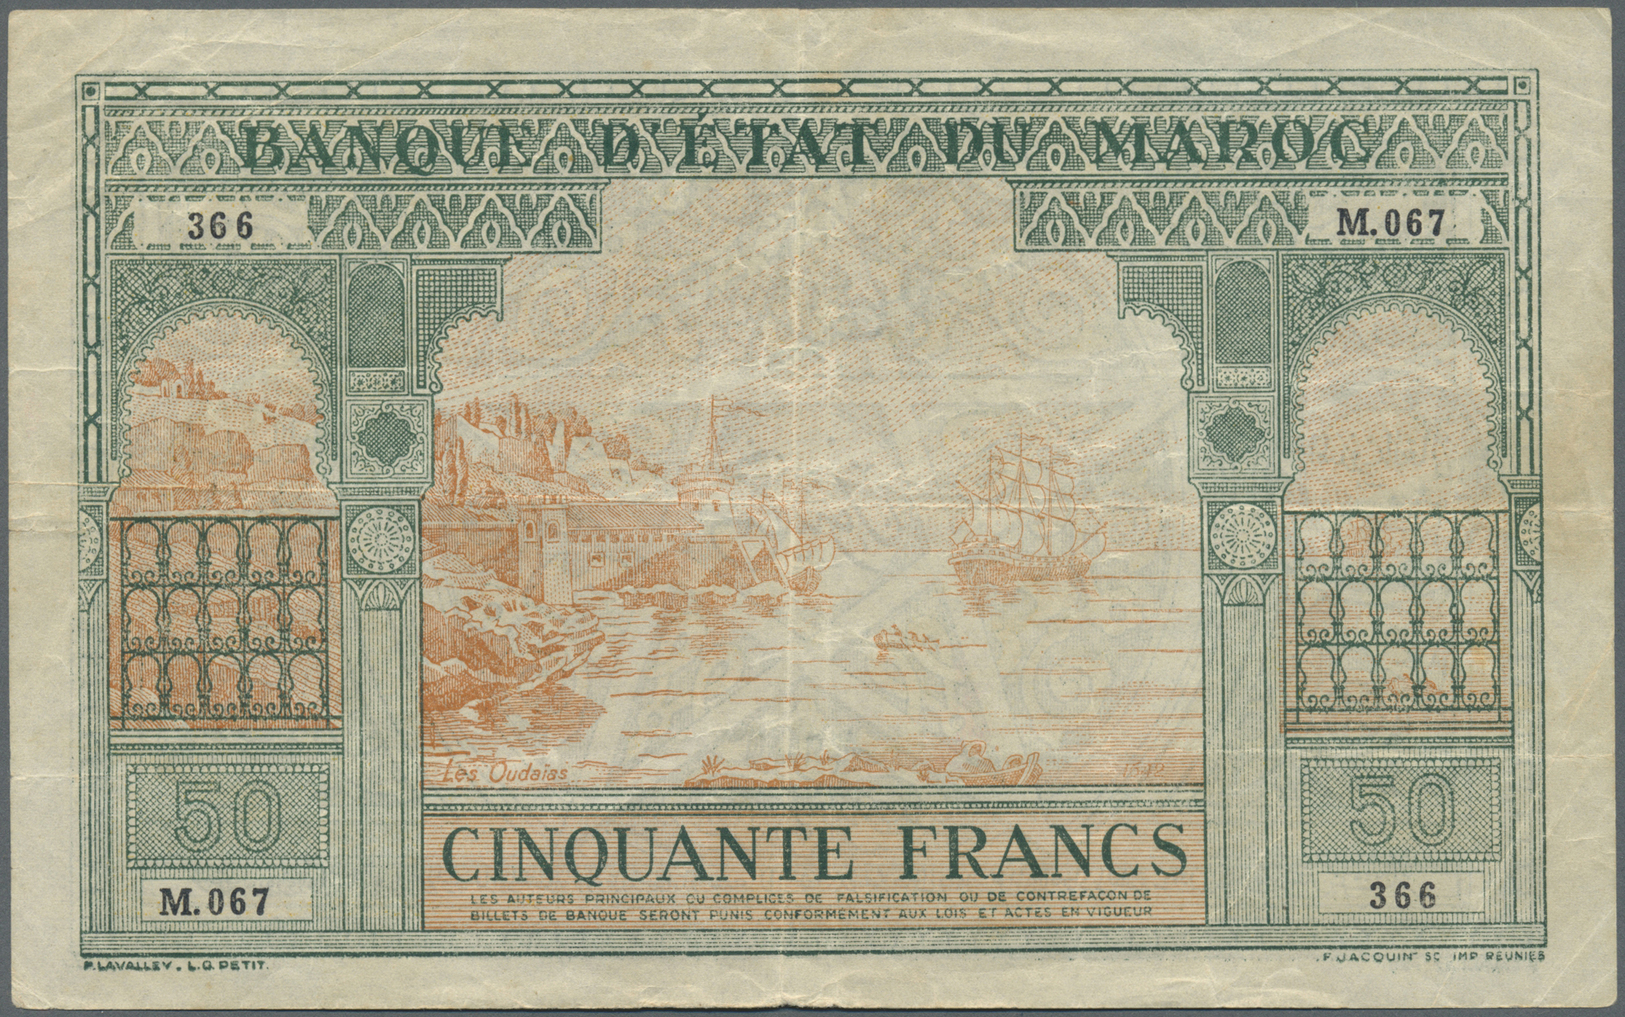 01755 Morocco / Marokko: 50 Francs 1943 P. 40 In Used Condition With Several Folds And Creases In Paper, No Holes Or Tea - Morocco